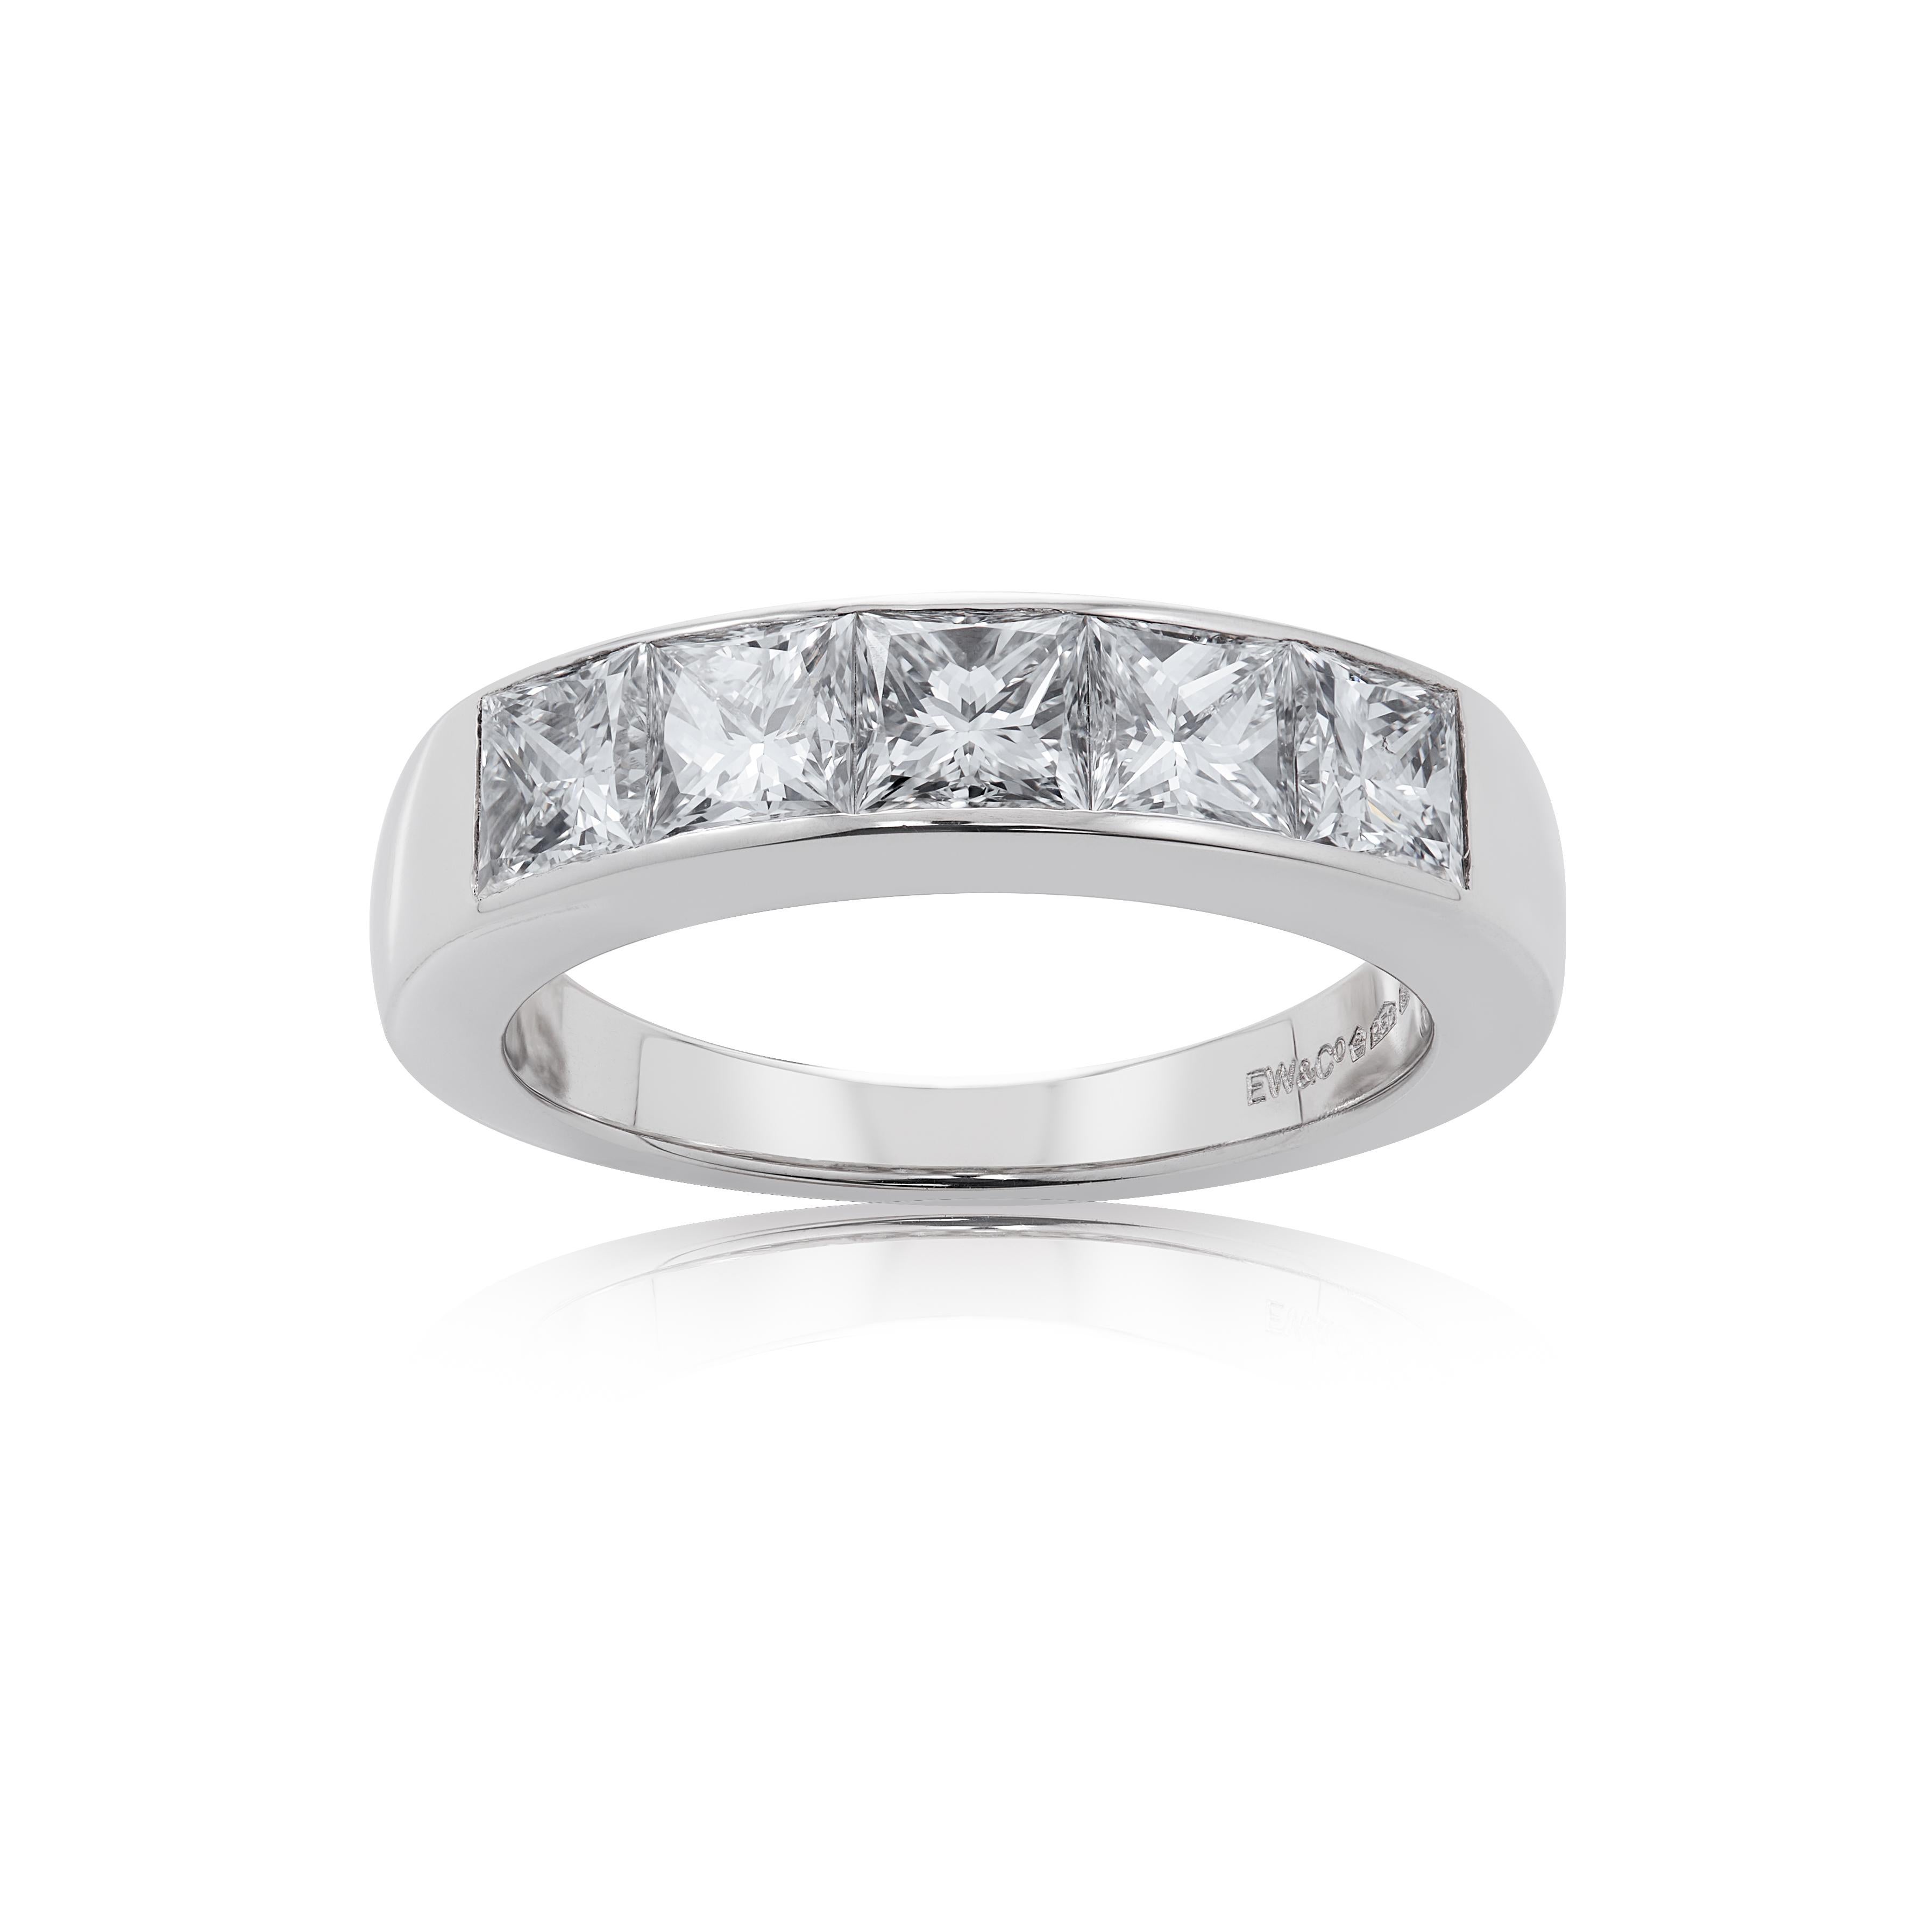 E Wolfe & Company handmade five-stone princess-cut diamond ring made in Platinum. The ring contains five princess-cut diamonds of G colour and VS clarity which collectively weigh 1.86 carats. It was handmade at our London Workshop during 2021 and